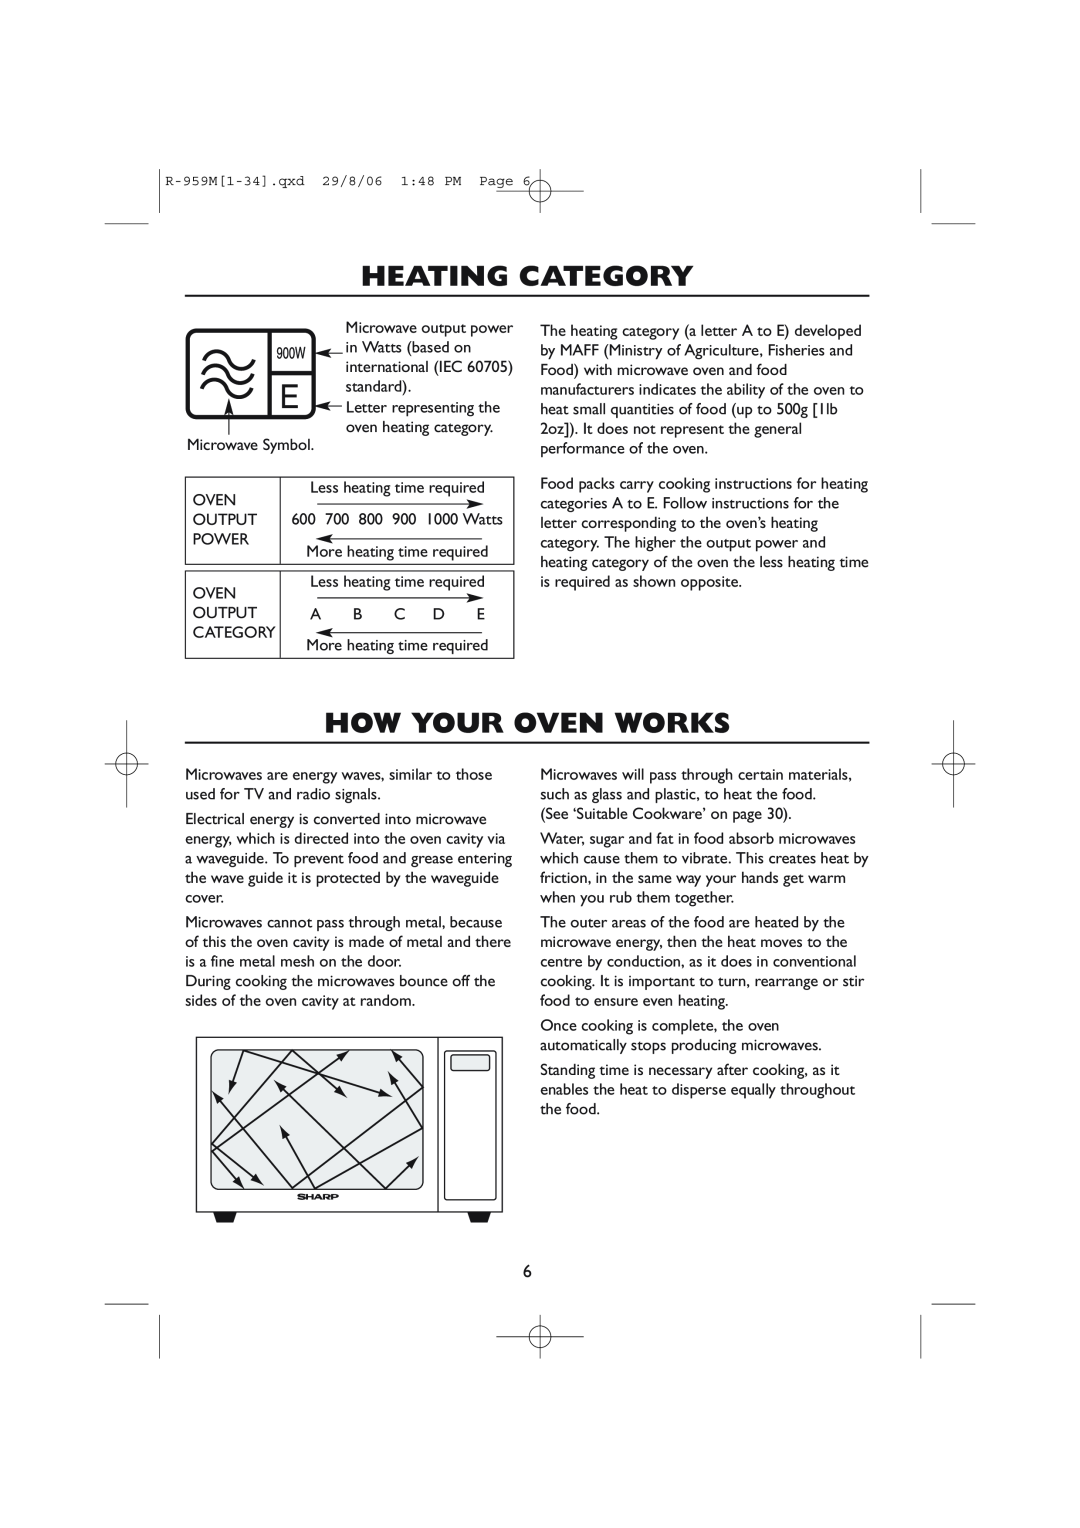 Sharp R-98STM-A, R-959M operation manual Heating Category, How Your Oven Works 